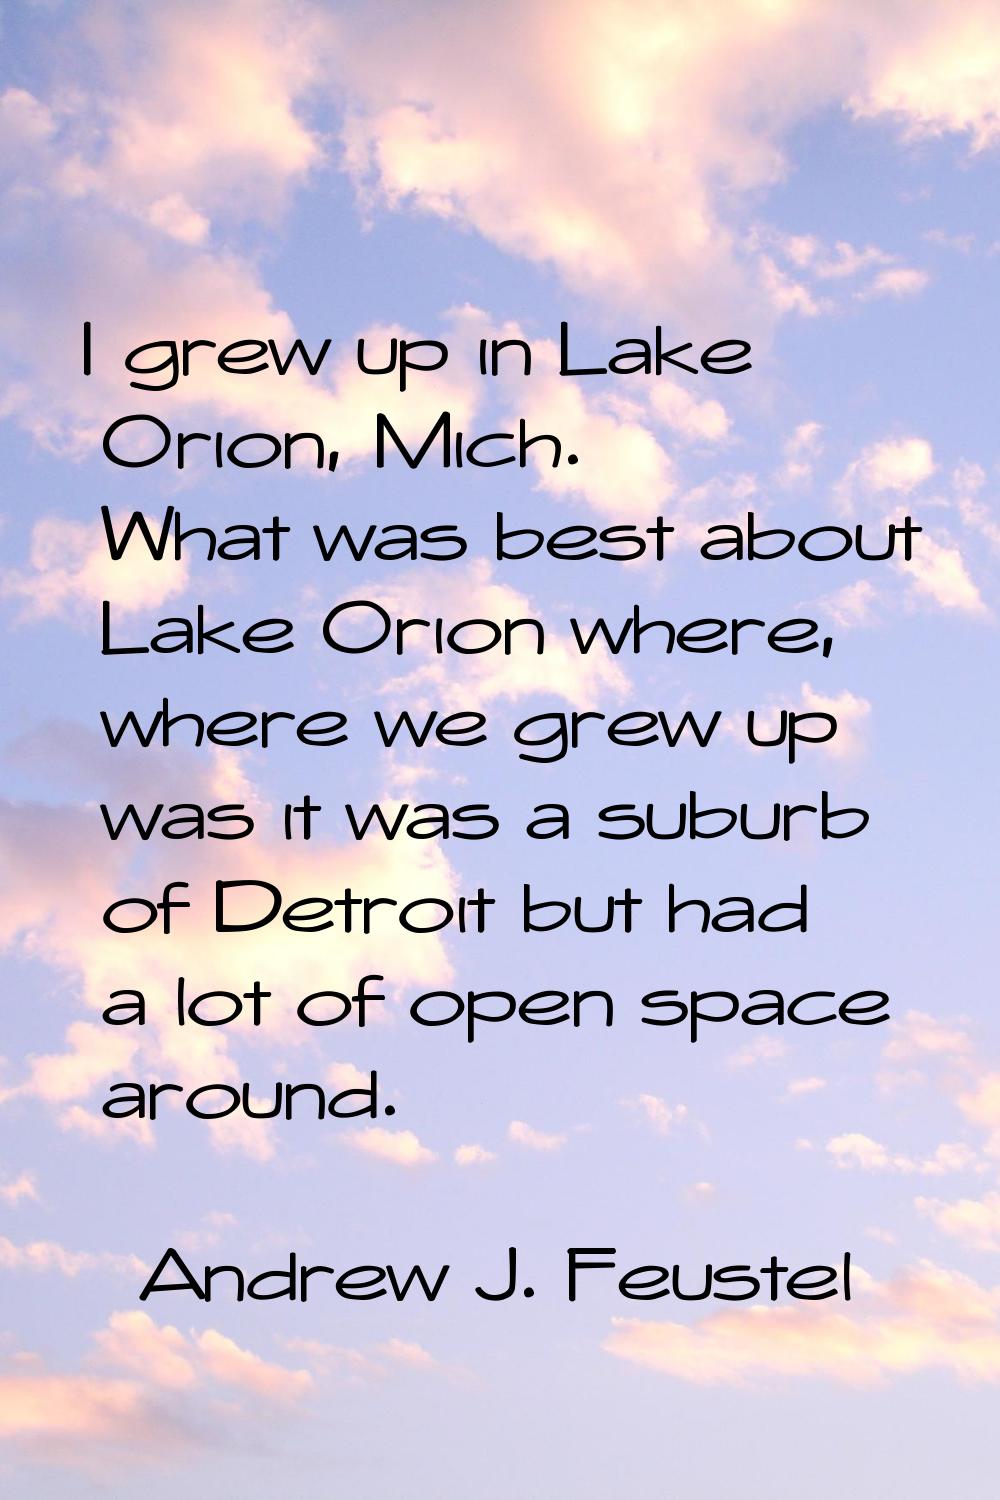 I grew up in Lake Orion, Mich. What was best about Lake Orion where, where we grew up was it was a 